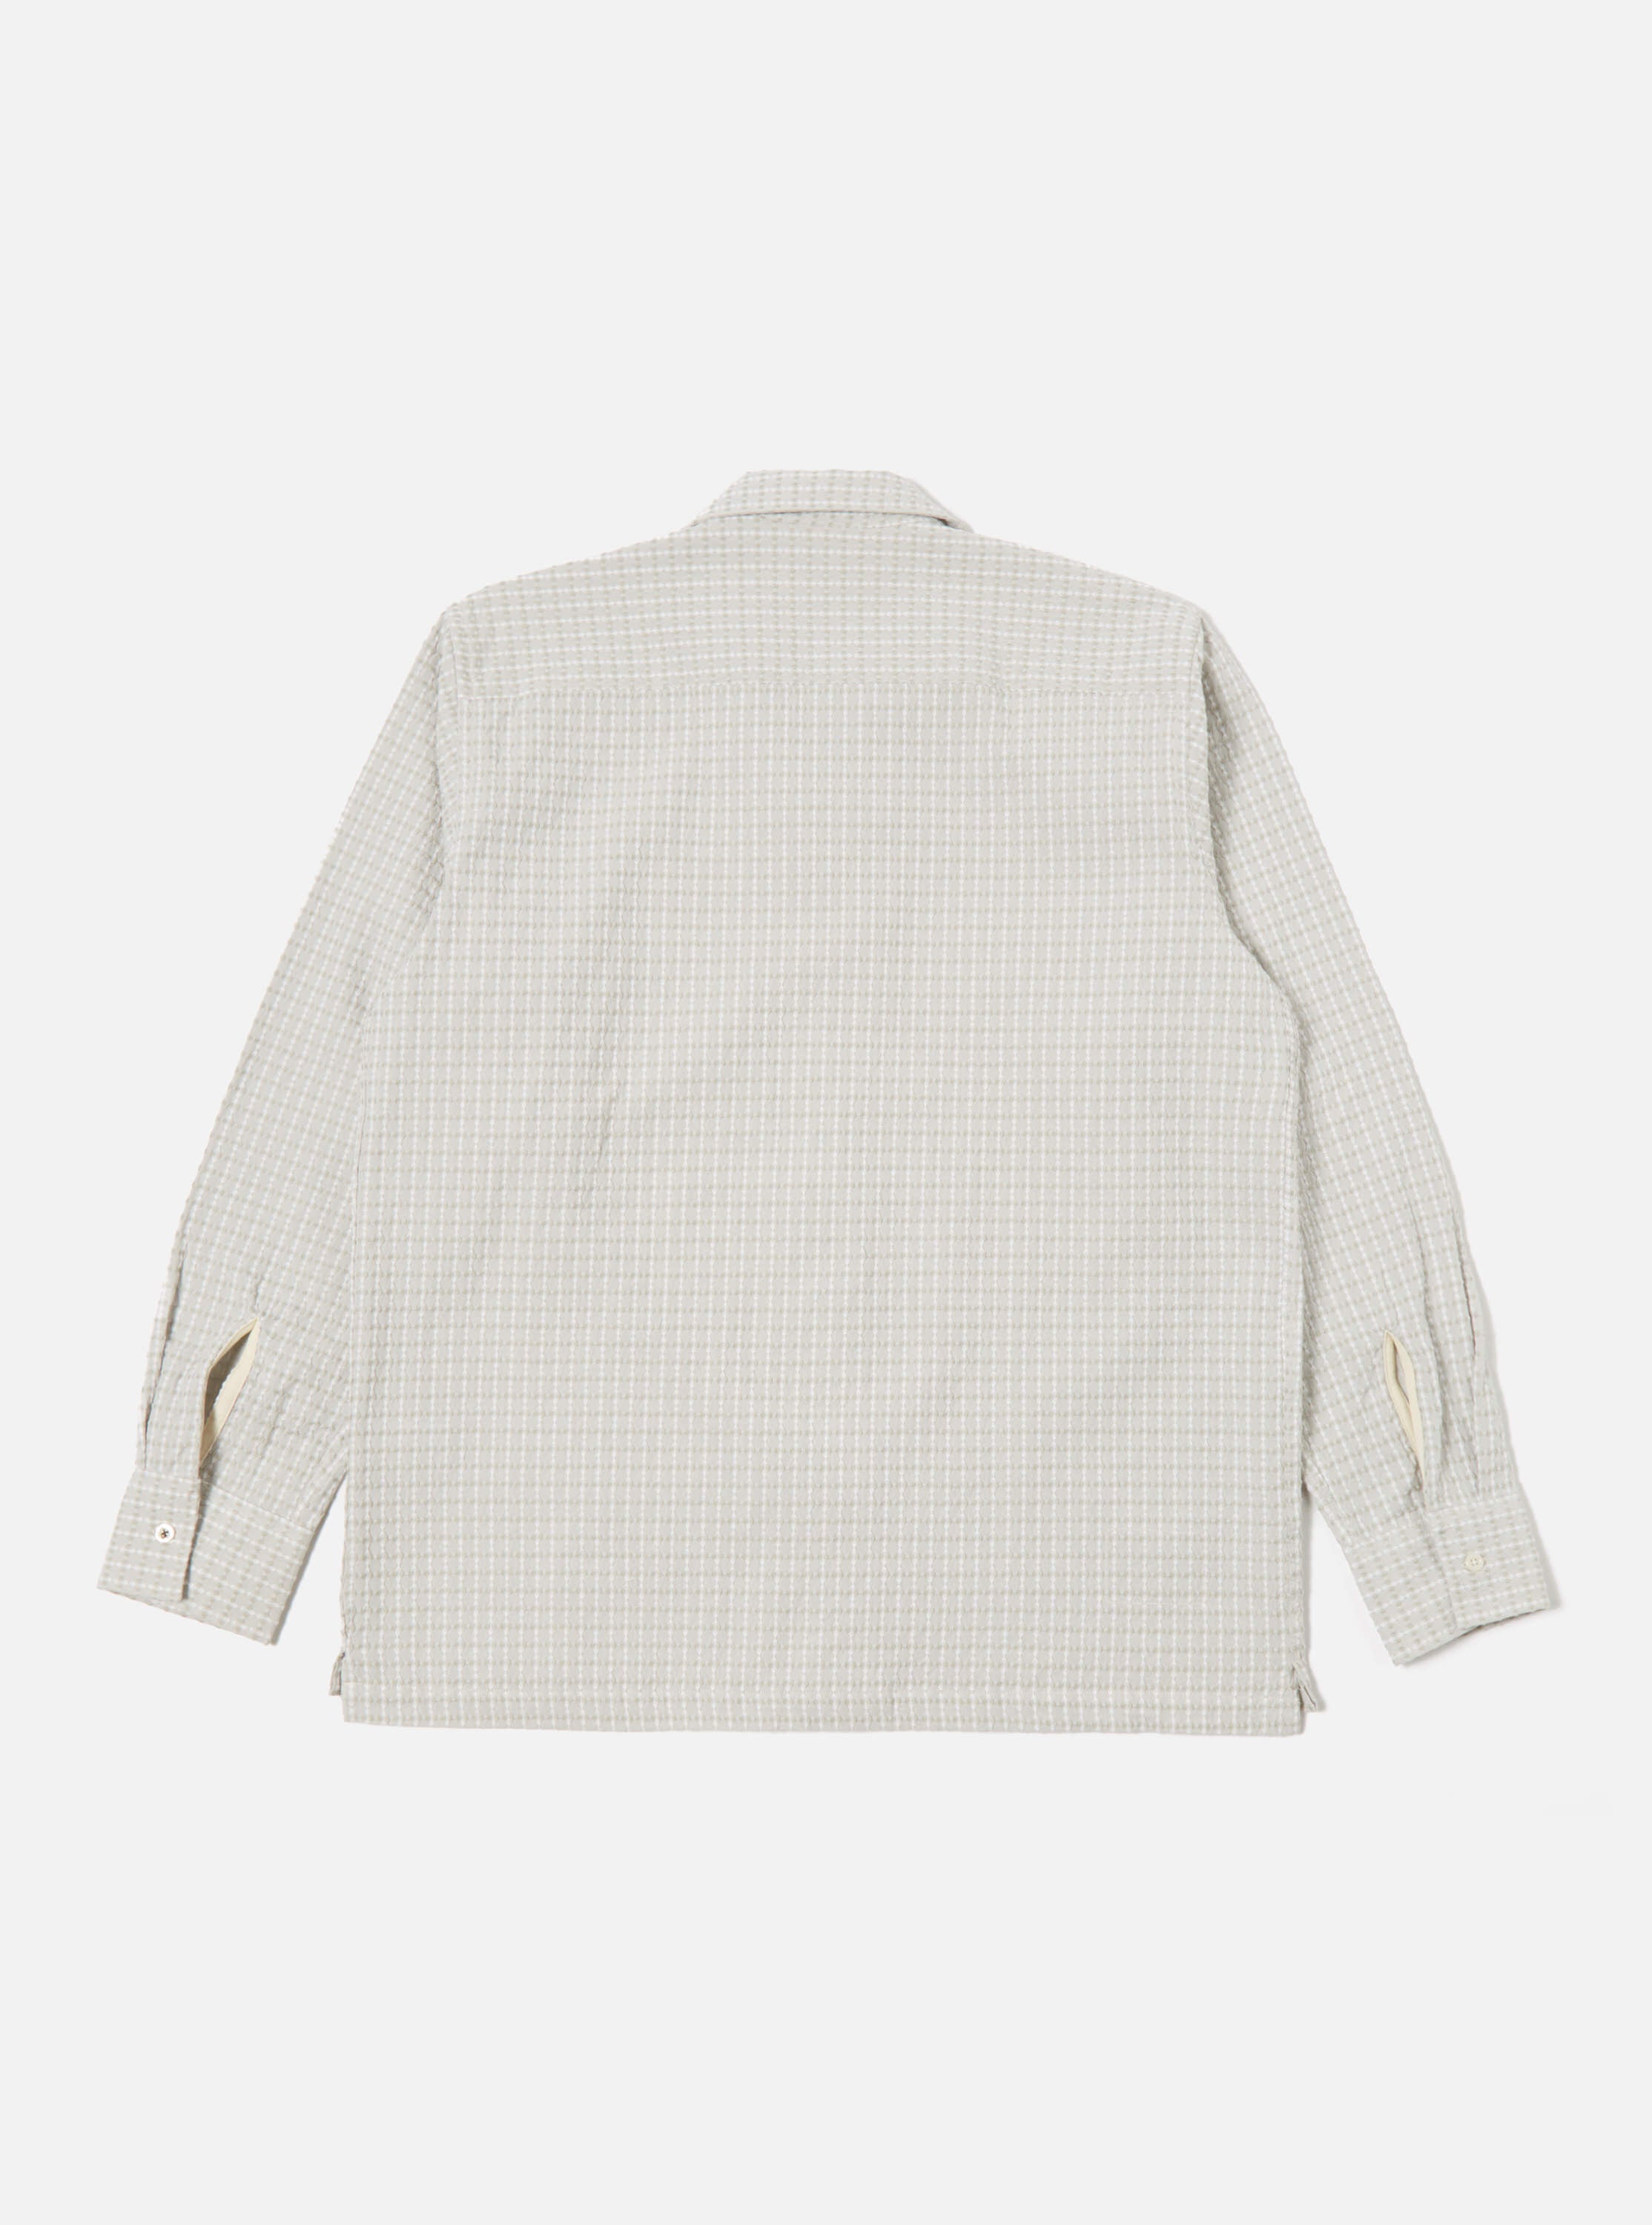 Universal Works L/S Camp Shirt II in Light Olive Delos Cotton